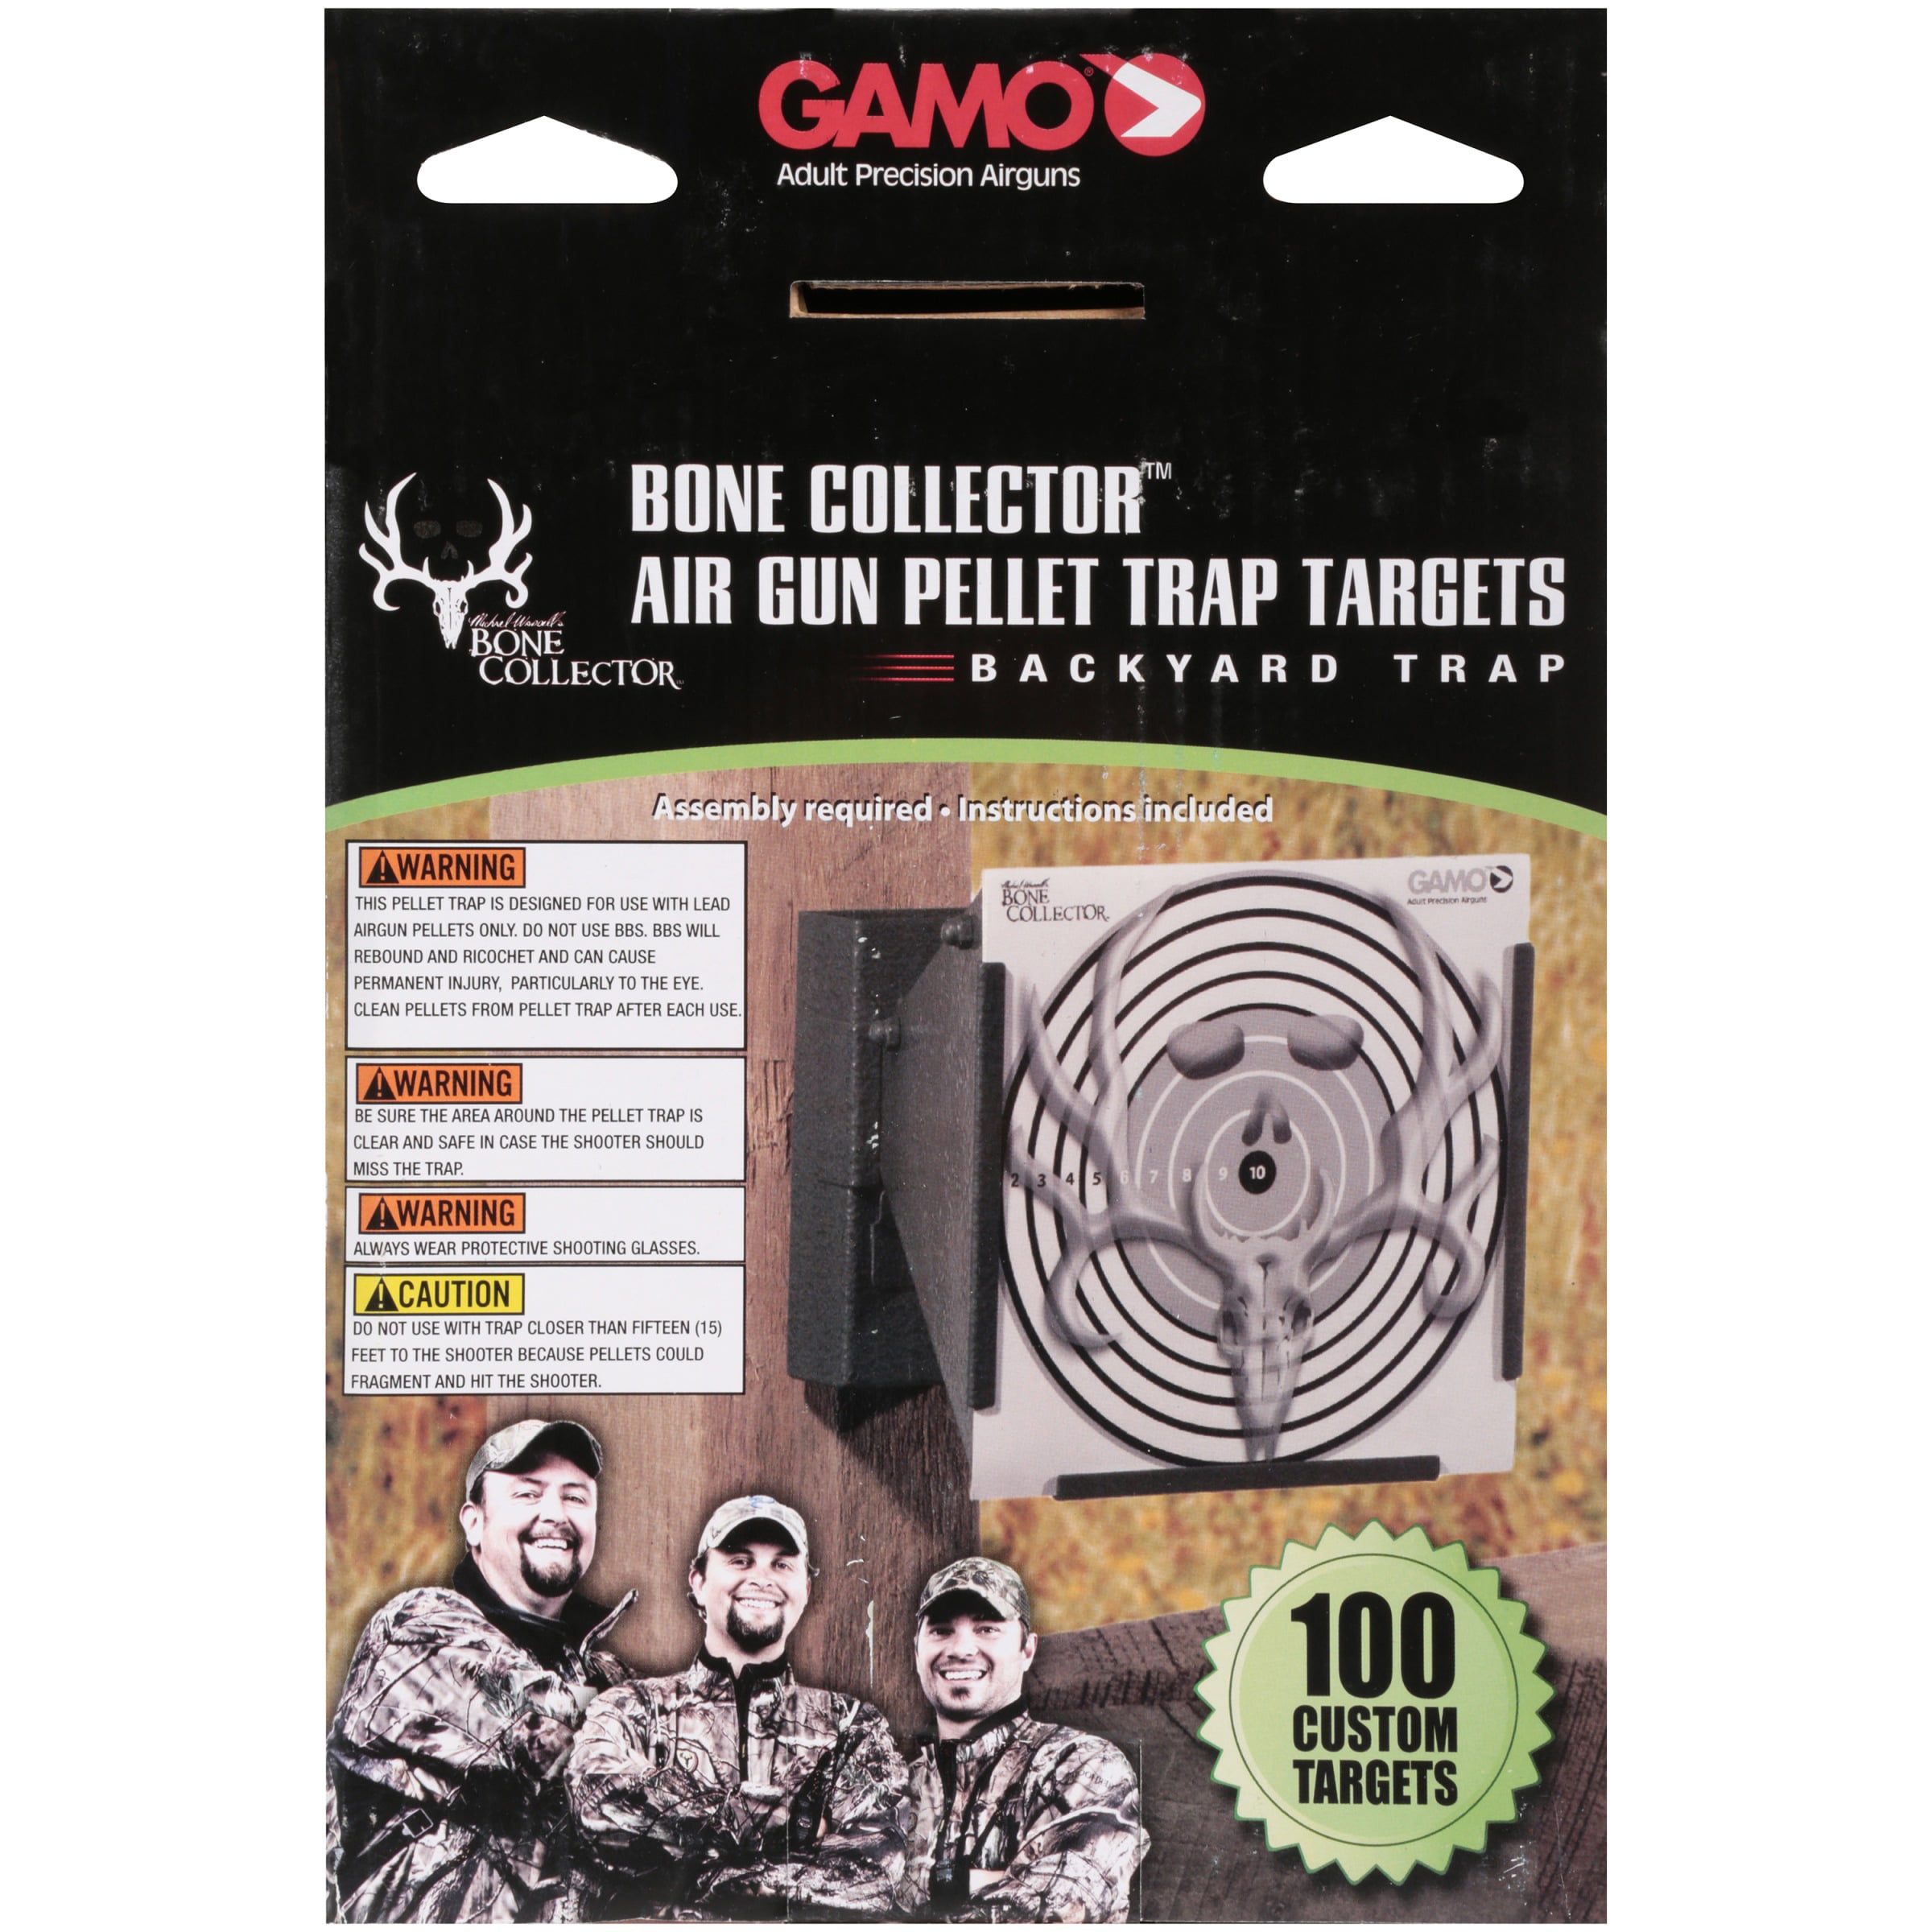 NEW Gamo Bone Collector Cone Backyard Trap with Paper Targets FREE SHIPPING